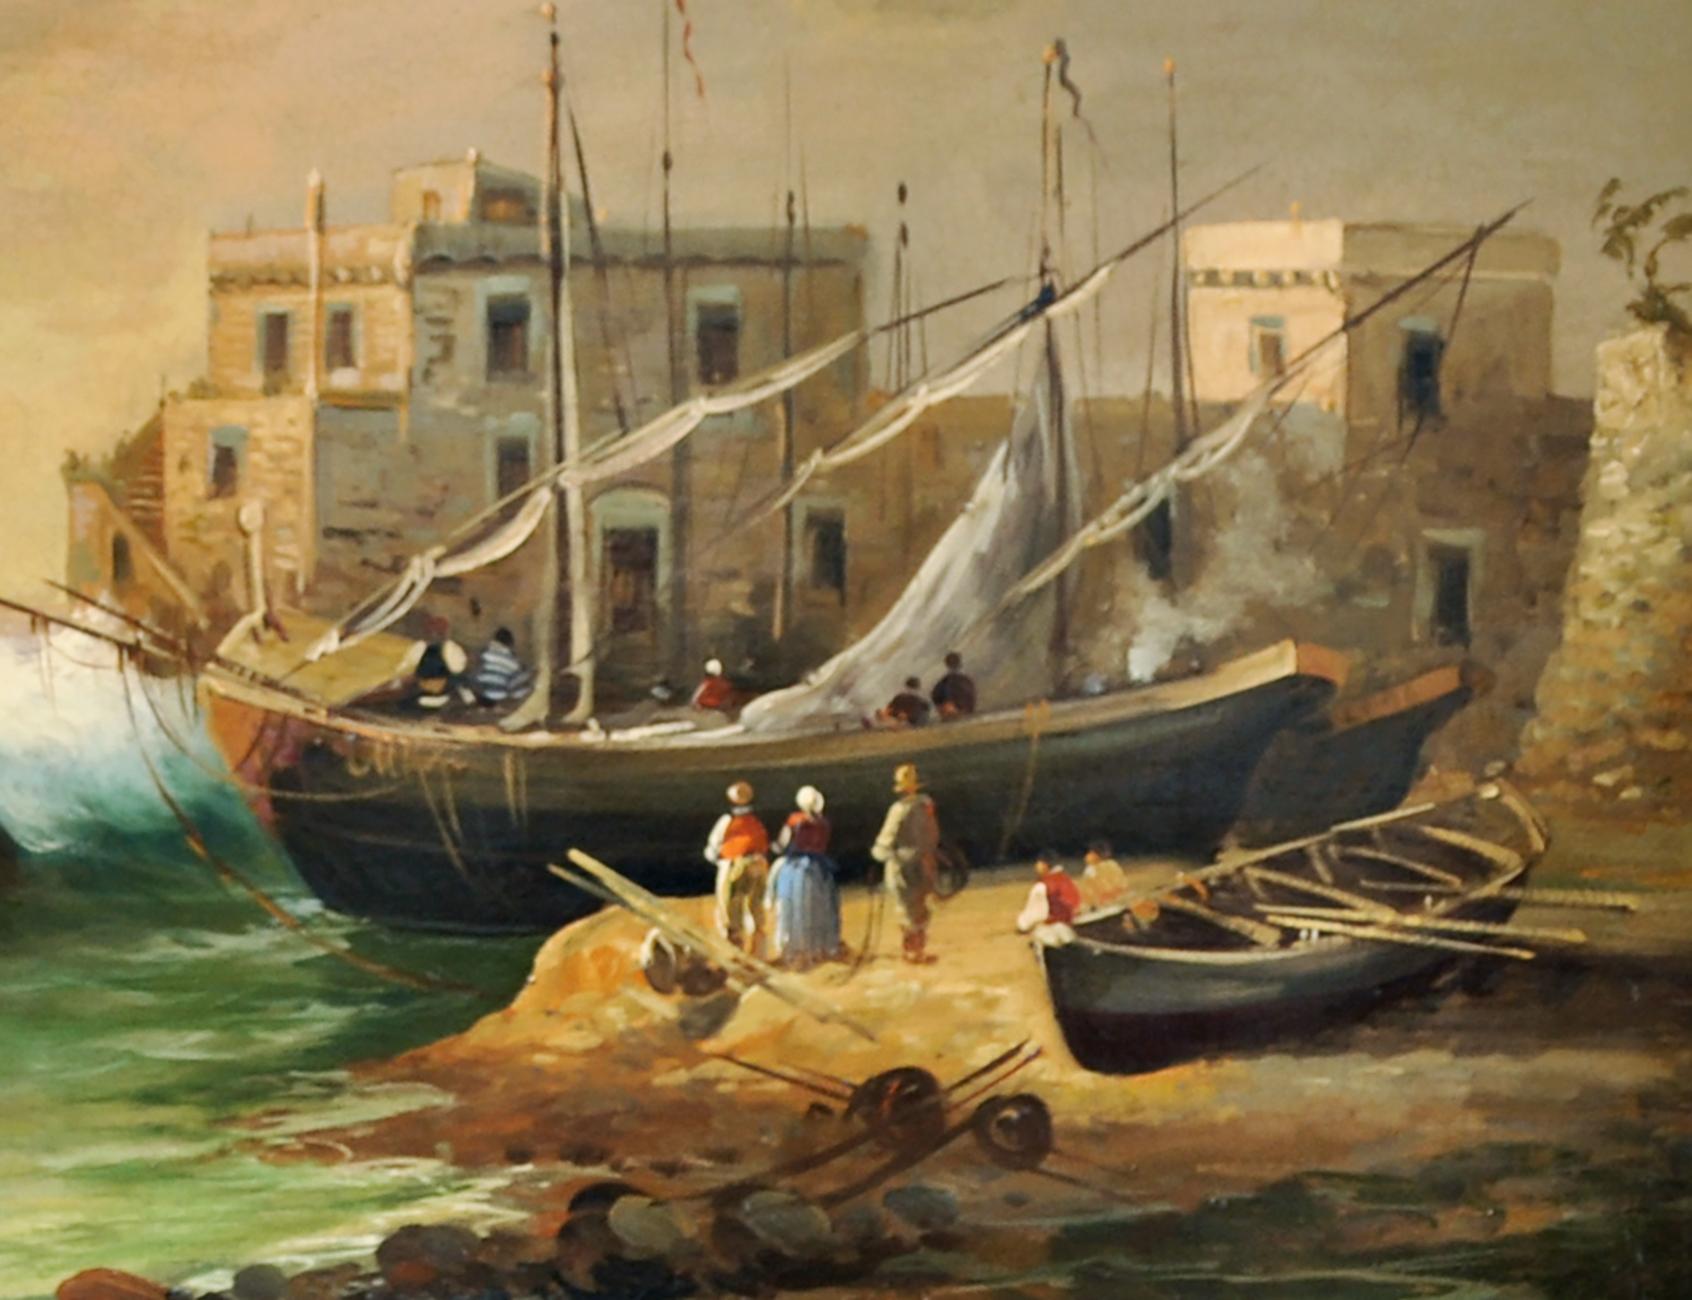 ISCHIA -Posillipo School - Italian Landscape Oil on Canvas Painting  - Brown Landscape Painting by Vincenzo Montella